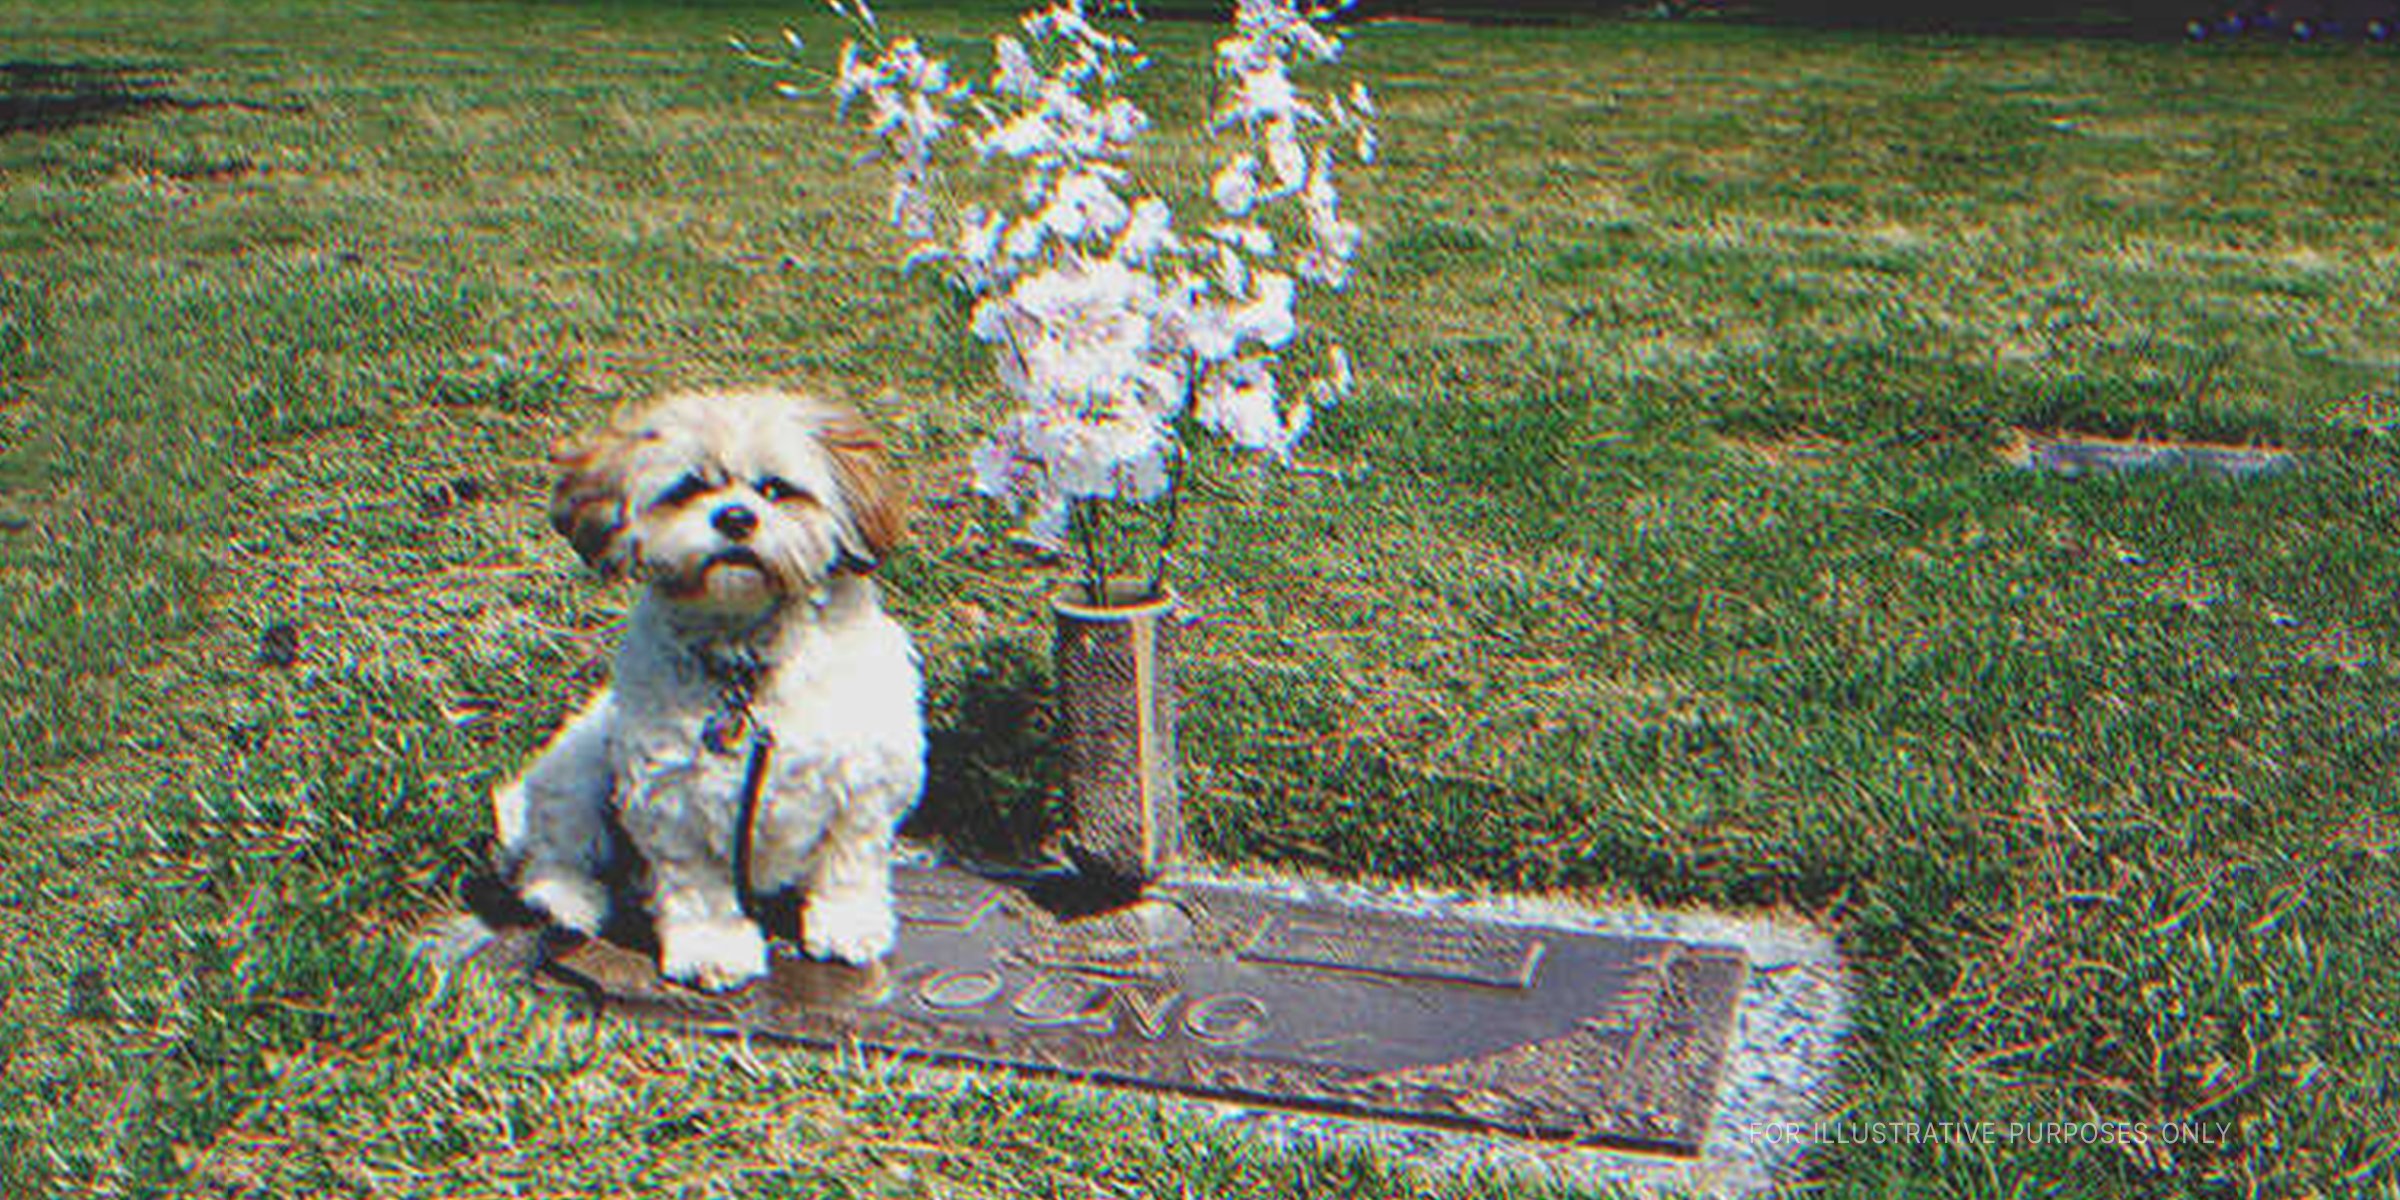 A dog sitting on a grave. | Flickr/justthismoment (CC BY 2.0)